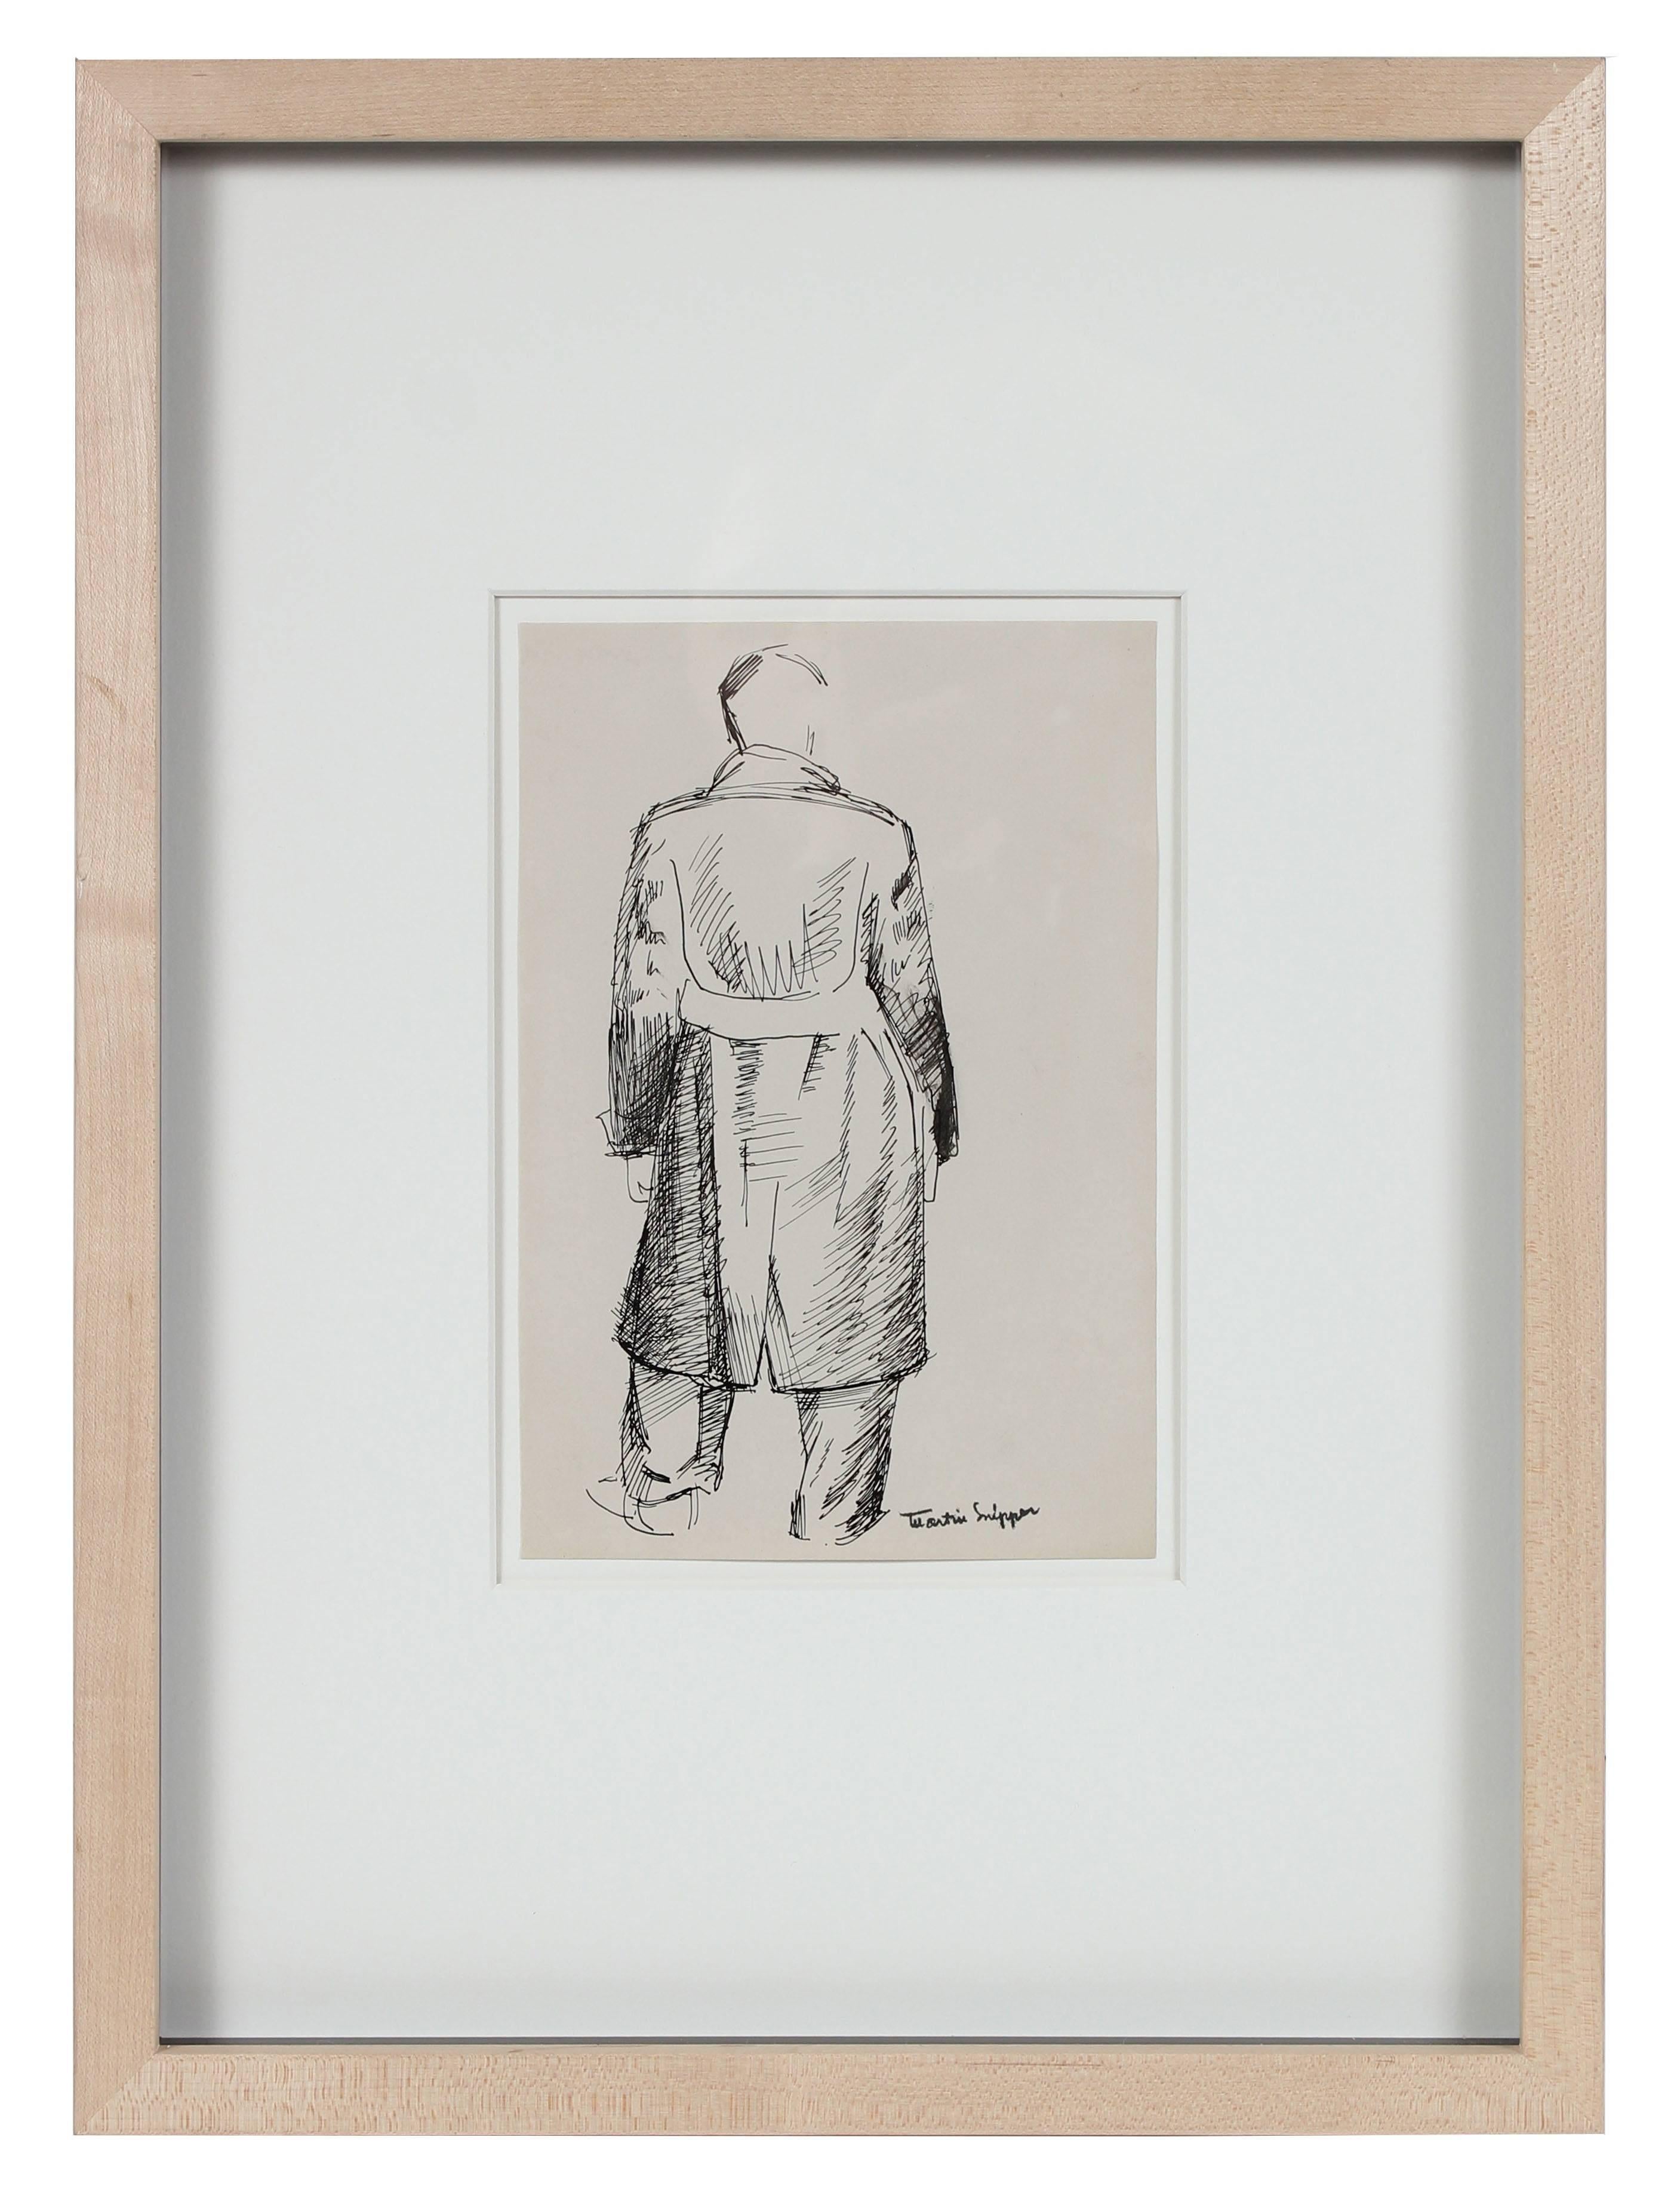 Martin Snipper Figurative Art - Man in Trench Coat, Ink on Paper Sketch, 20th Century